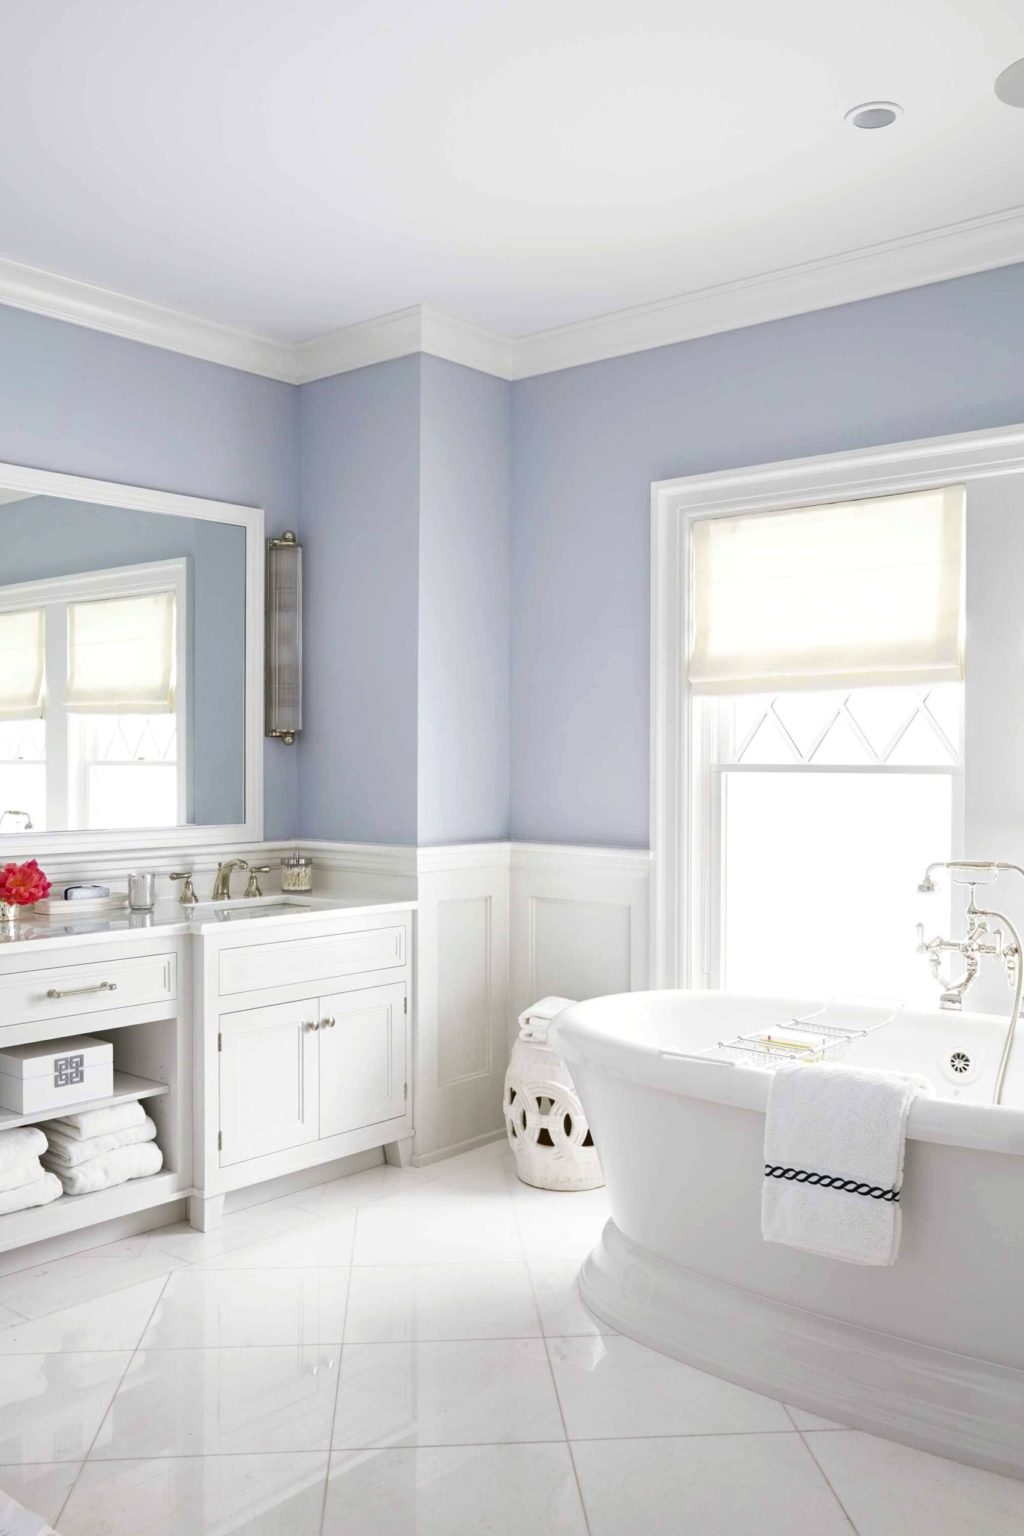 Use of paint 3 Top 10 Outdated Bathroom Design Trends to Avoid - 18